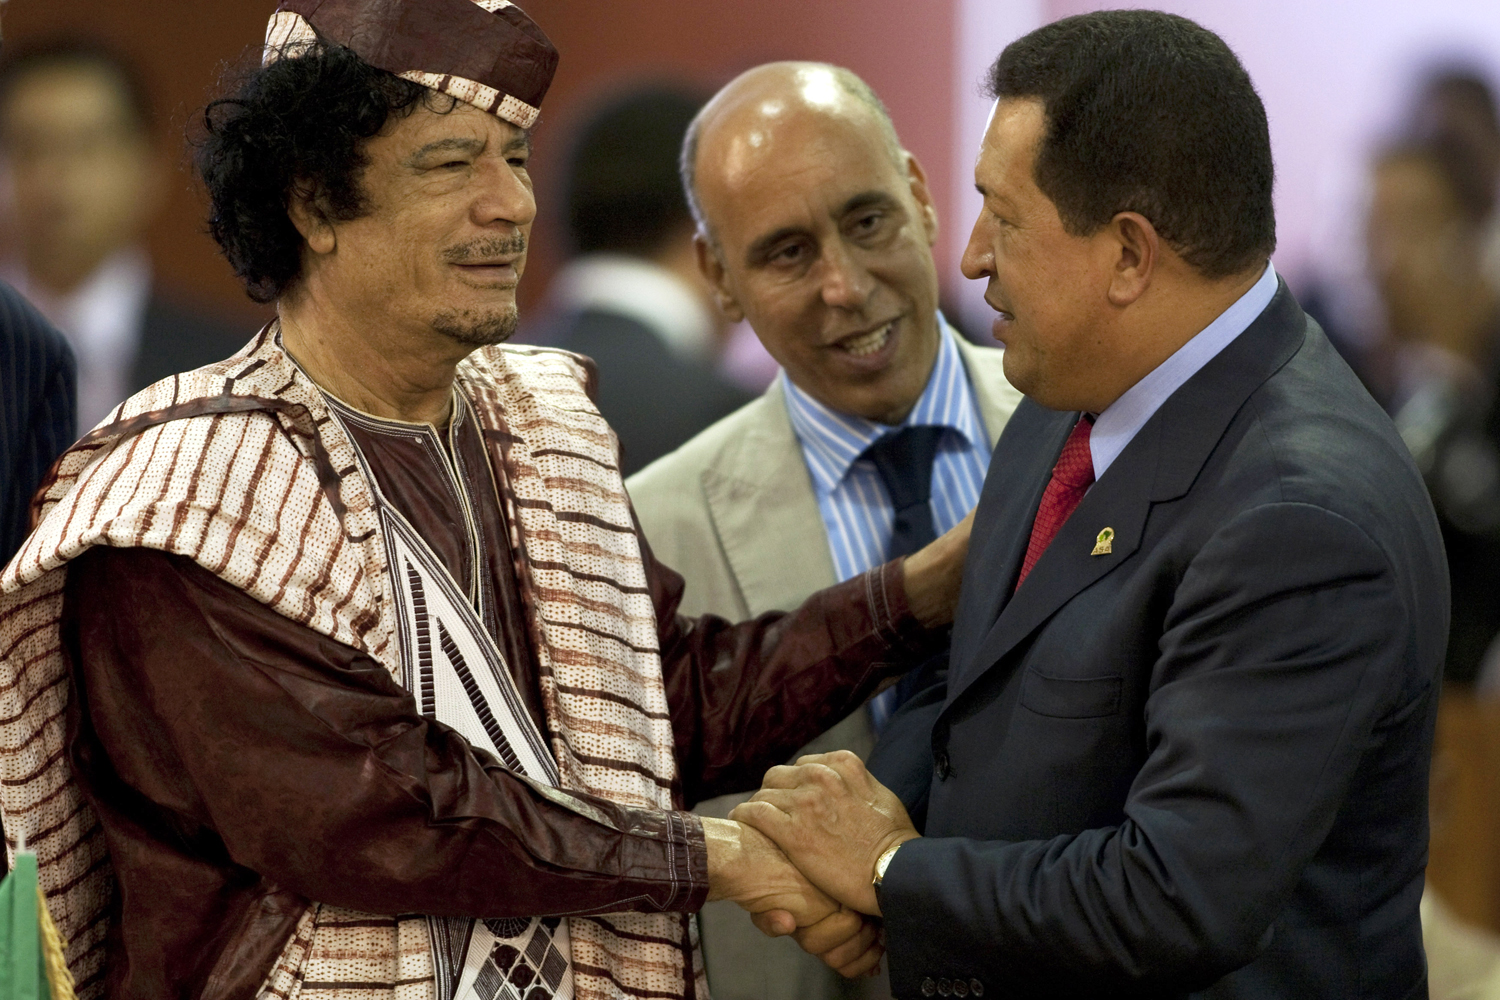 For Hugo Chavez, South-South cooperation was vital for Africa and Latin America to form a pole of power. Photo: NBC.